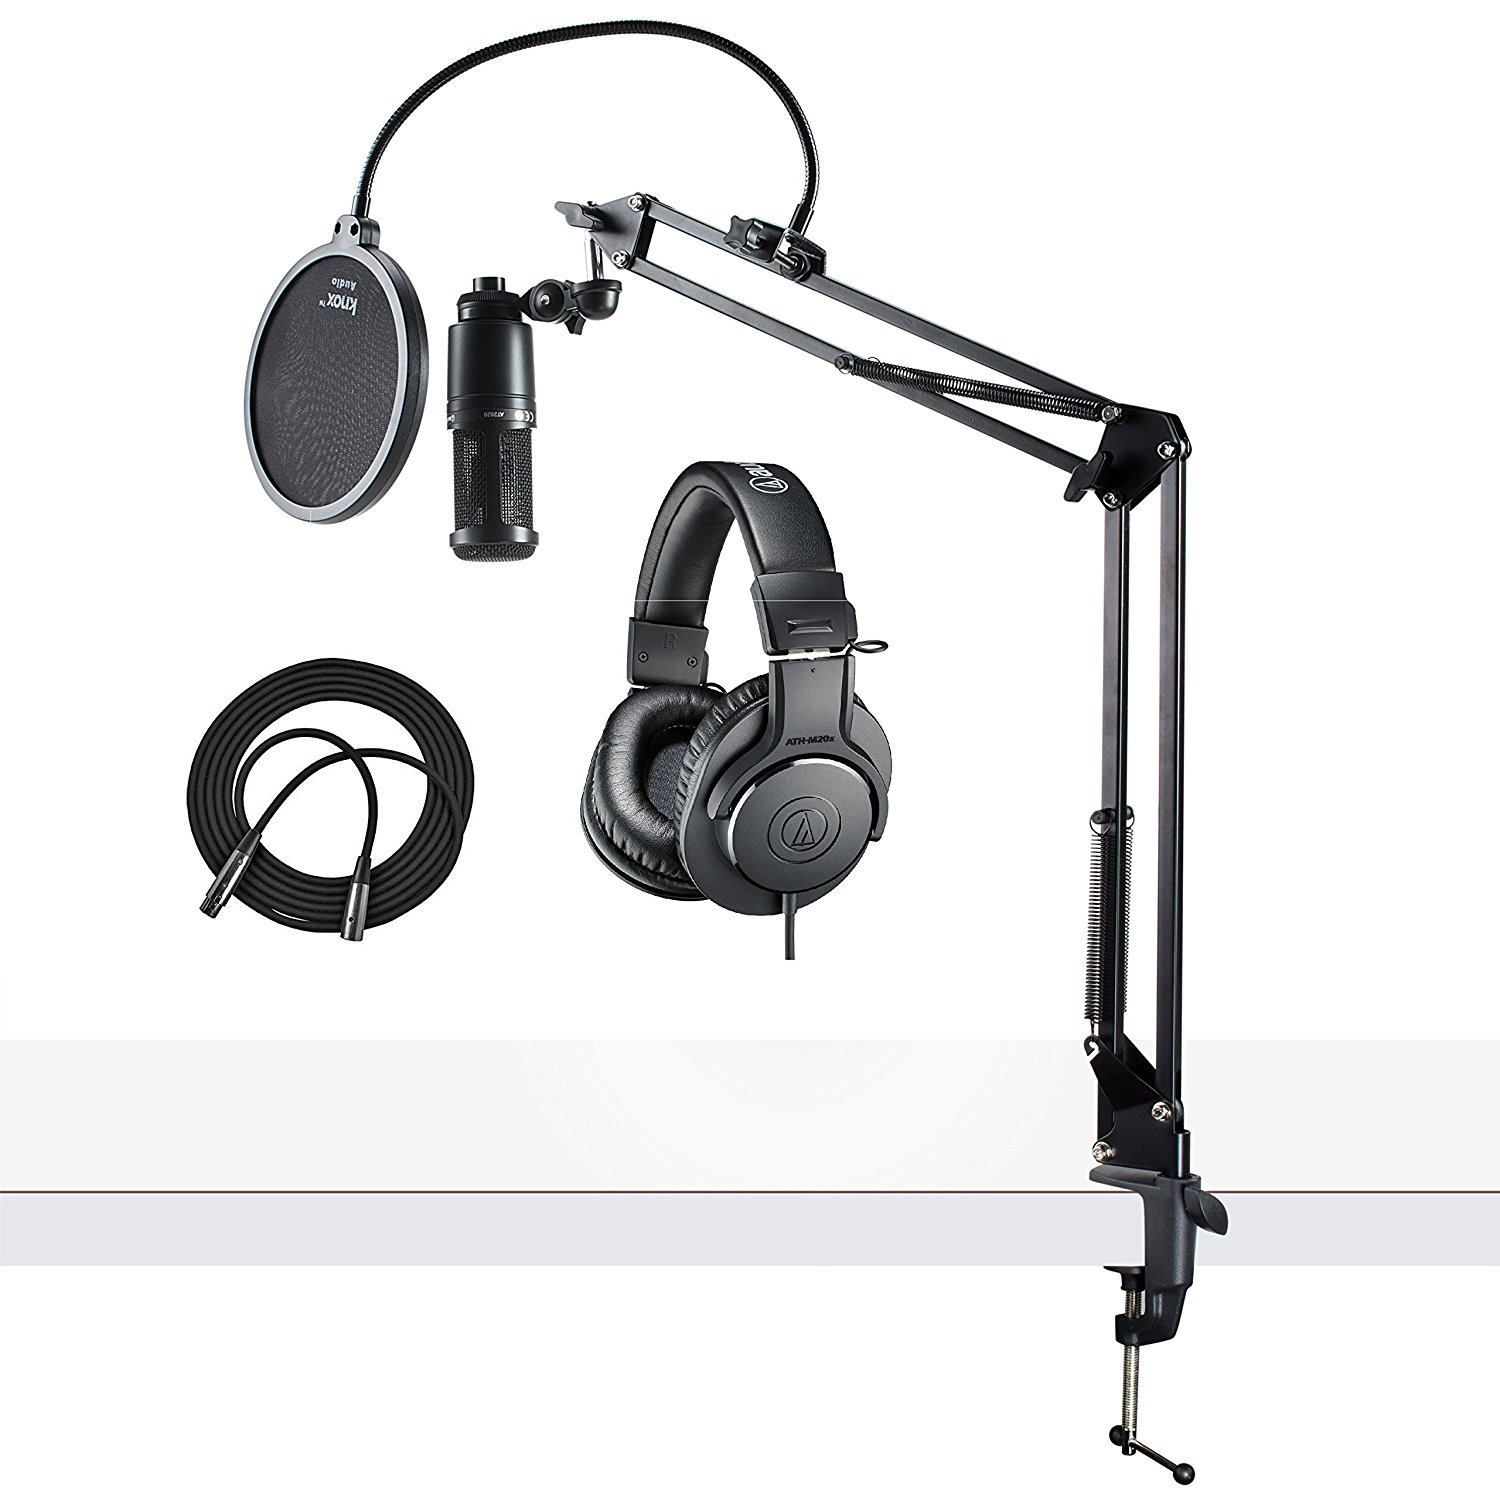 Audio-Technical AT2020 Microphone w/ ATH-M20x Headphones, Knox Pop Filter & Boom Arm